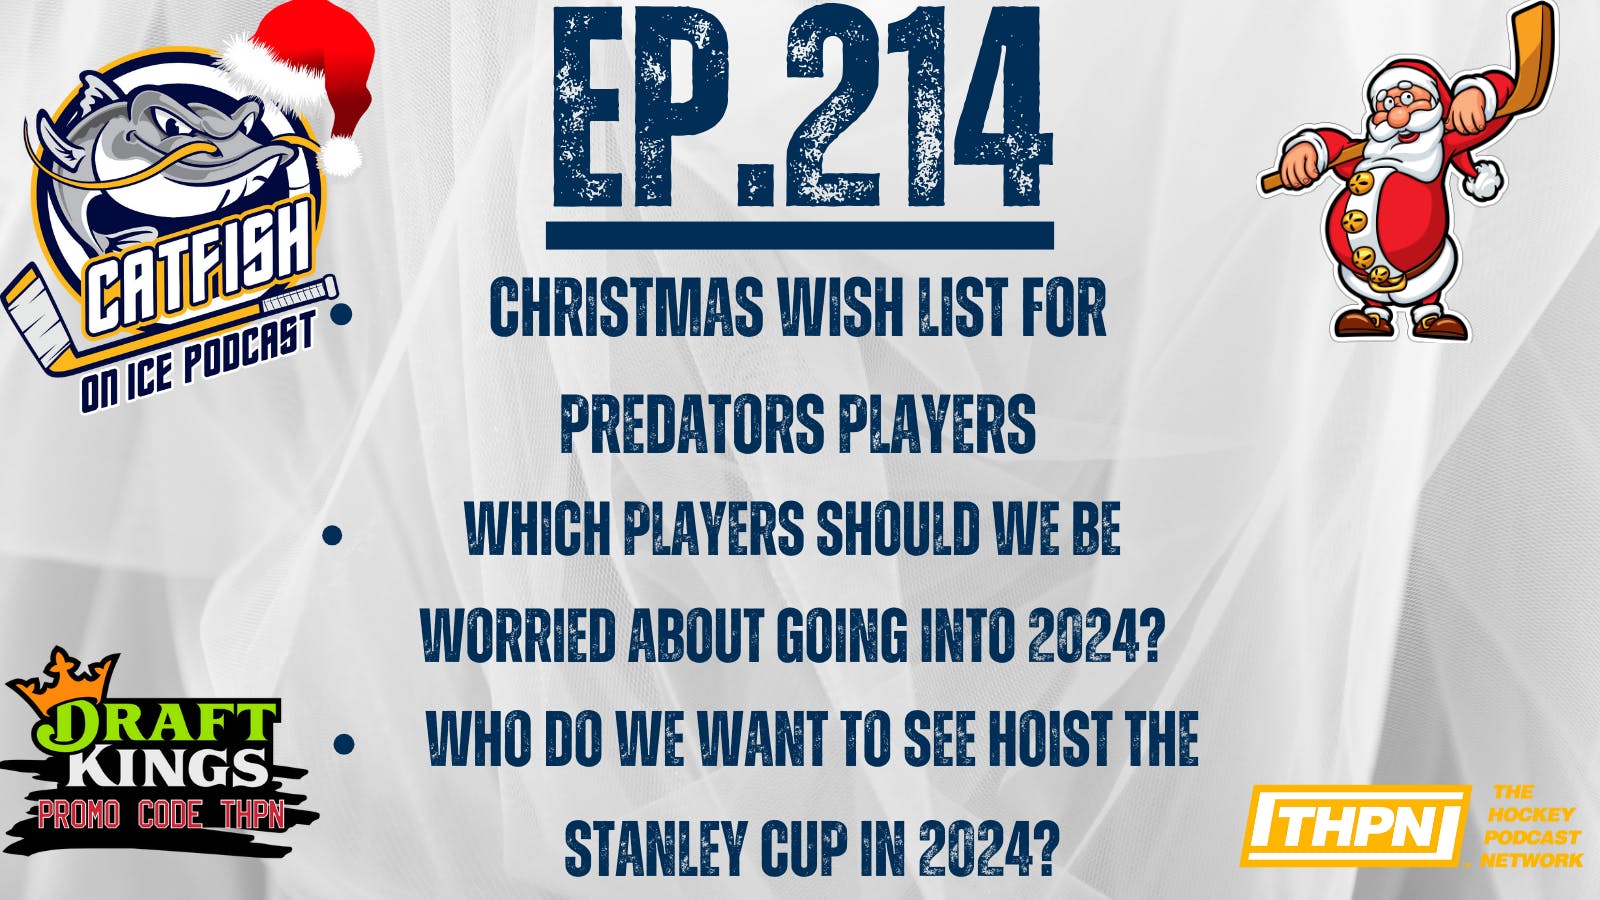 EP-214: Holiday Gifts for Preds Players in 2024, Back to Win Column vs. Flyers, Saros to Oilers Rumors Heating Up